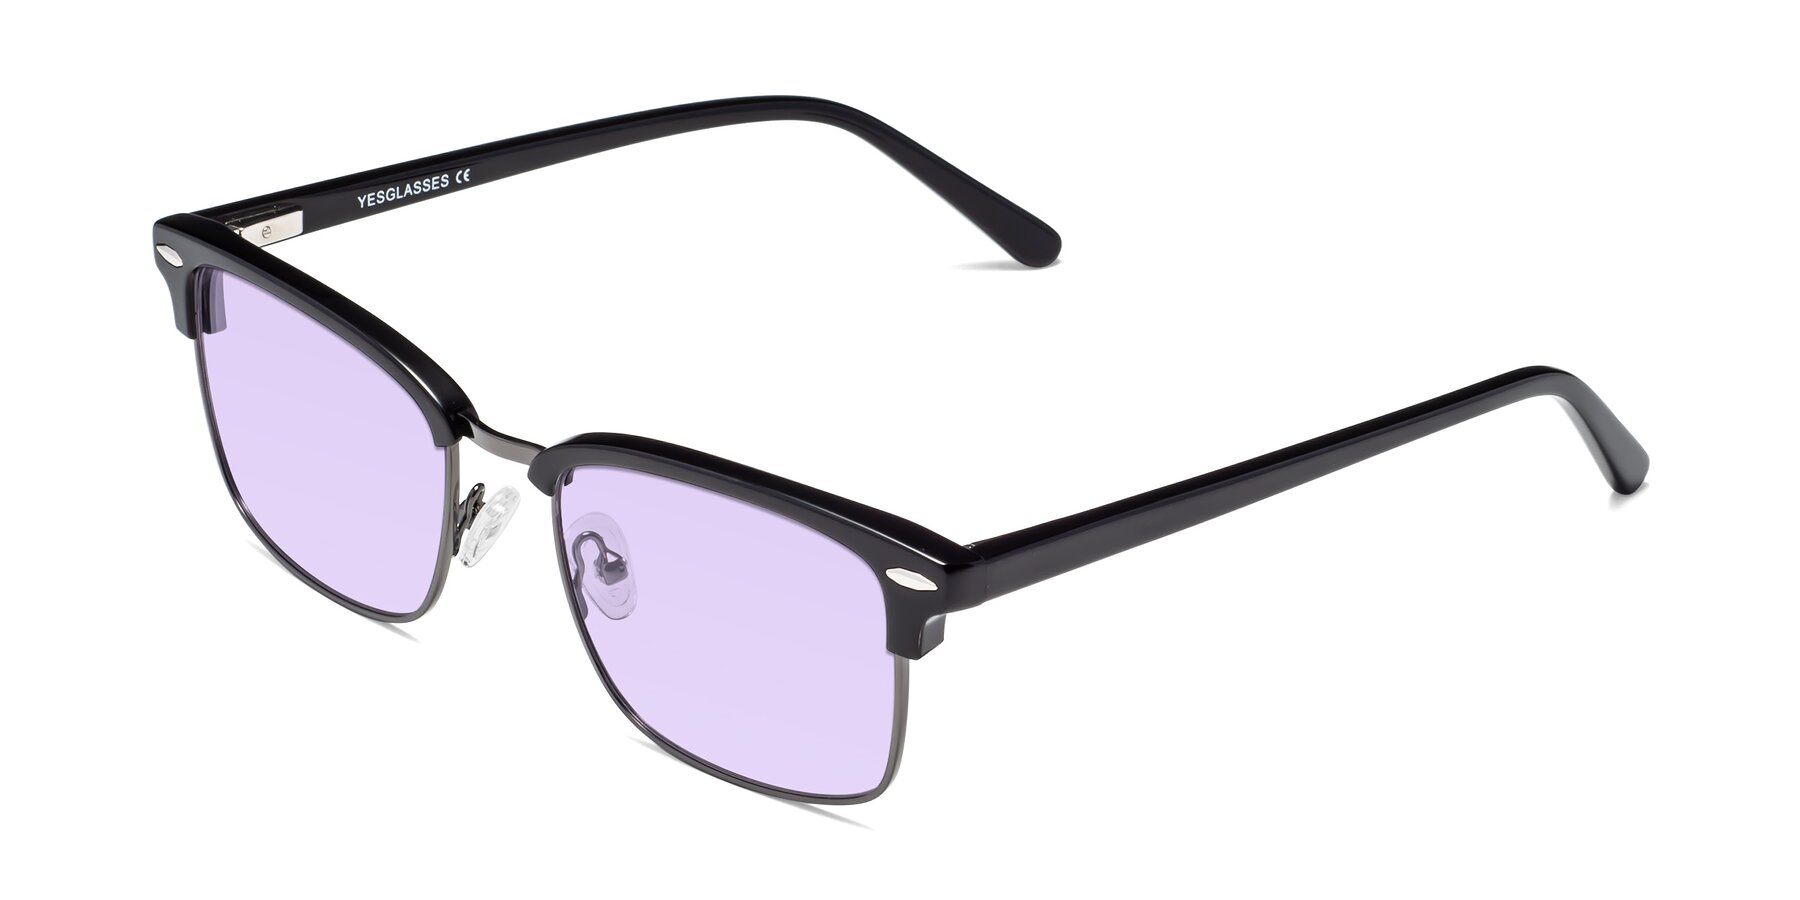 Angle of 17464 in Black-Gunmetal with Light Purple Tinted Lenses